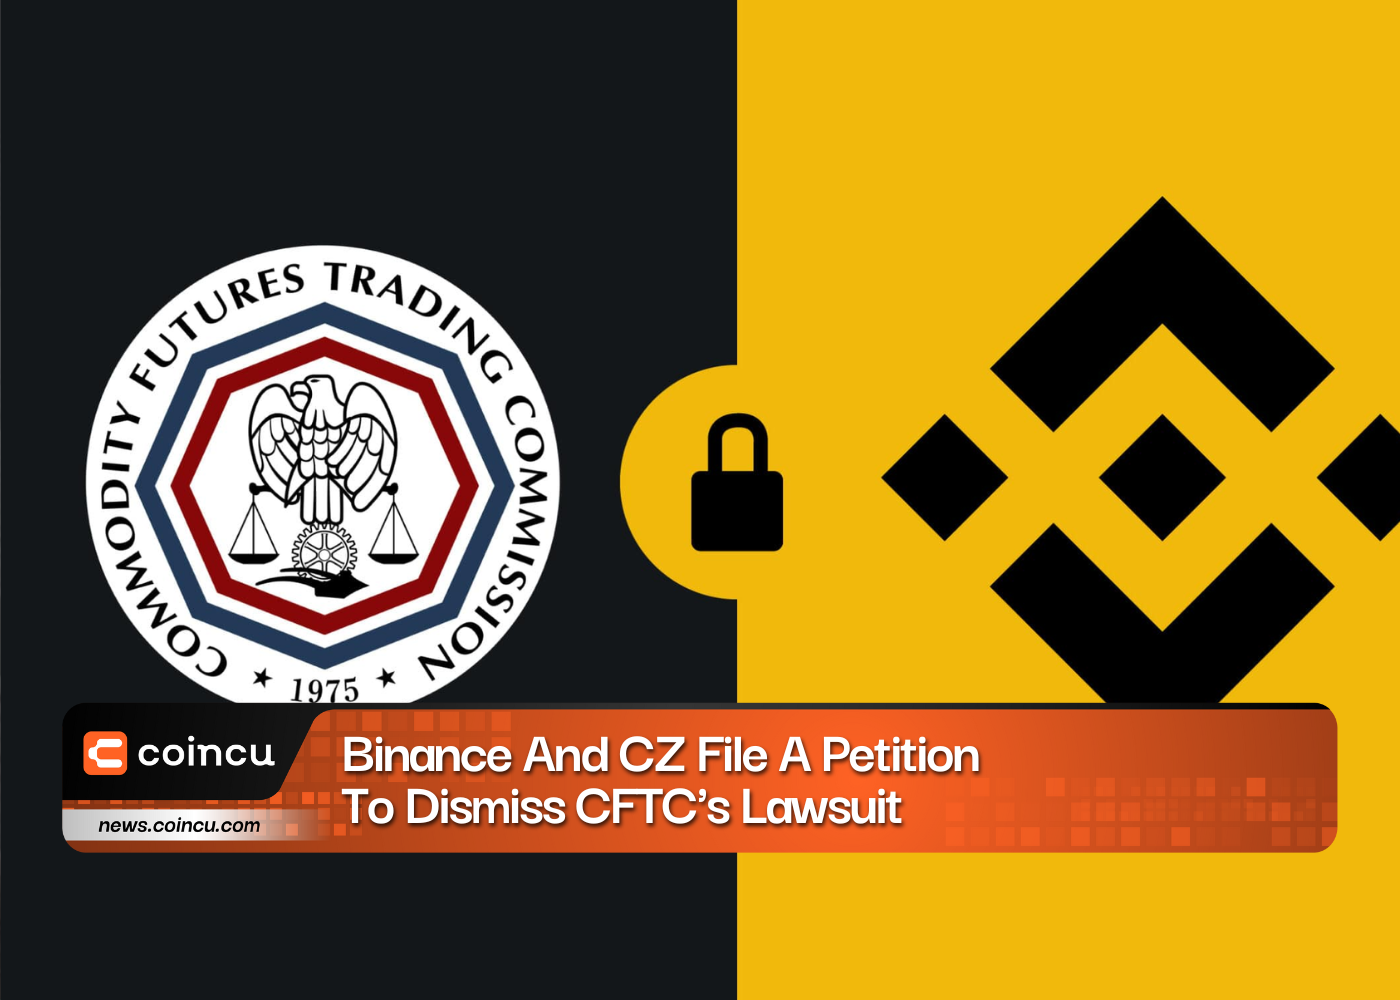 Binance And CZ File A Petition To Dismiss CFTC's Lawsuit